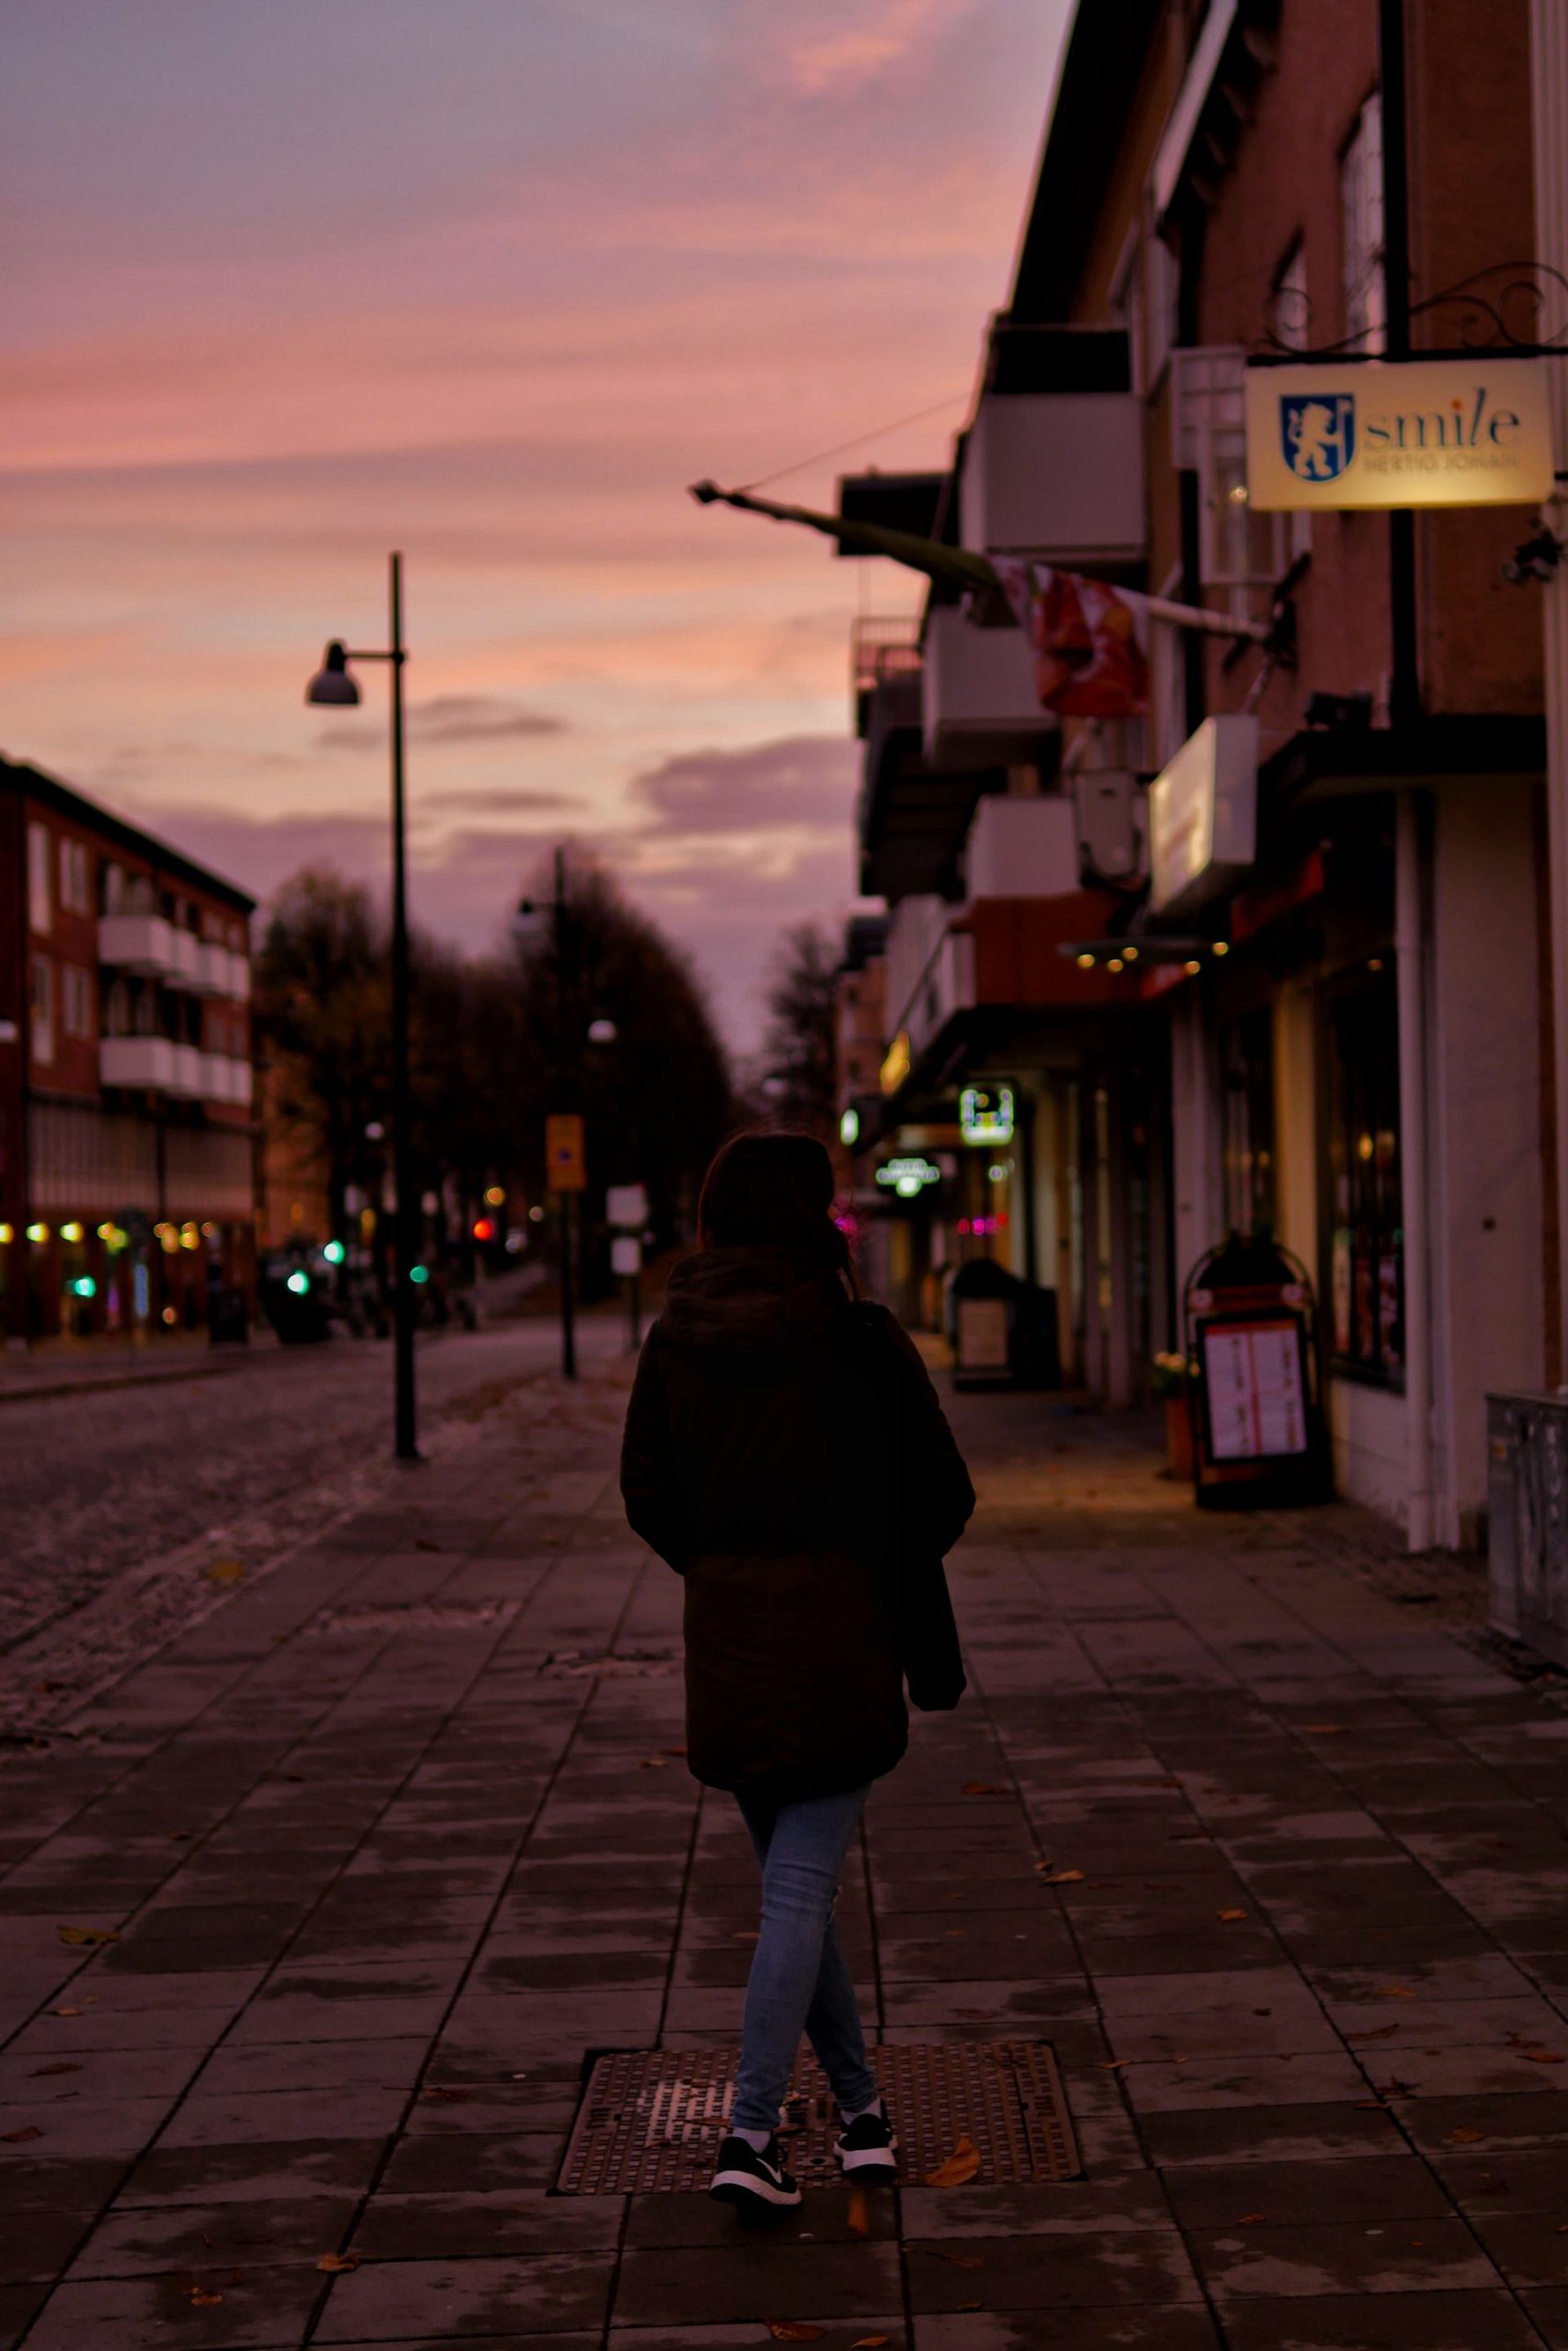 A girl walking on a street at sunset.